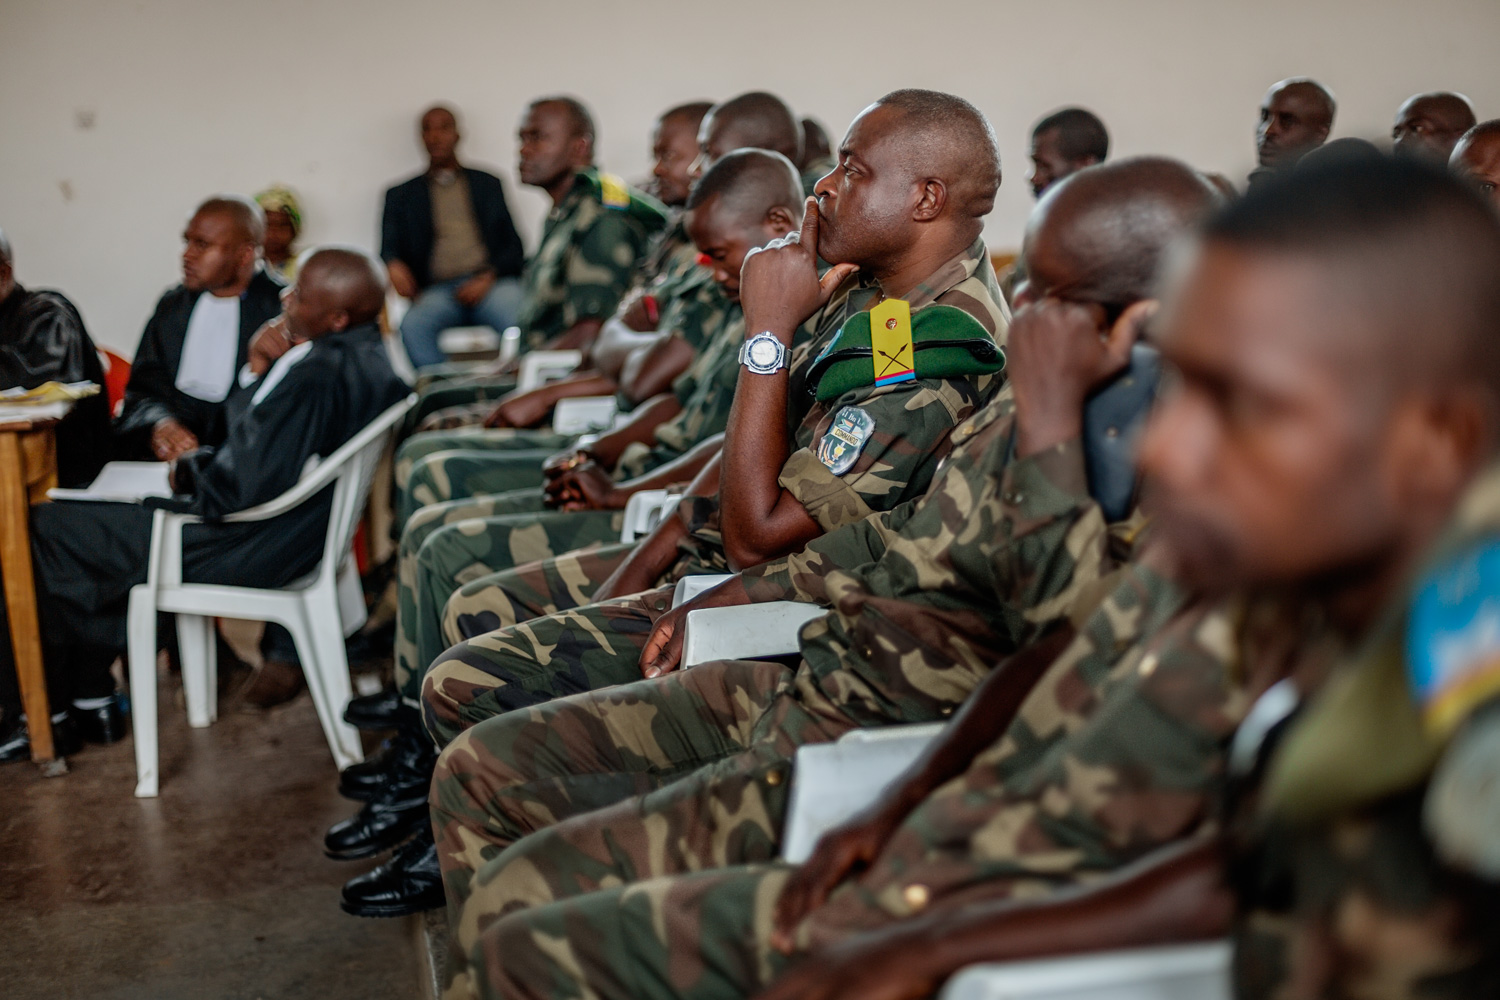  All but four of the 37 soldiers accused of rape sat in the trial room. The missing four were still on active duty in northern DRC. 25 of the accused were lower-ranked soldiers, while twelve were officers in charge of those soldiers’ units. At a tria